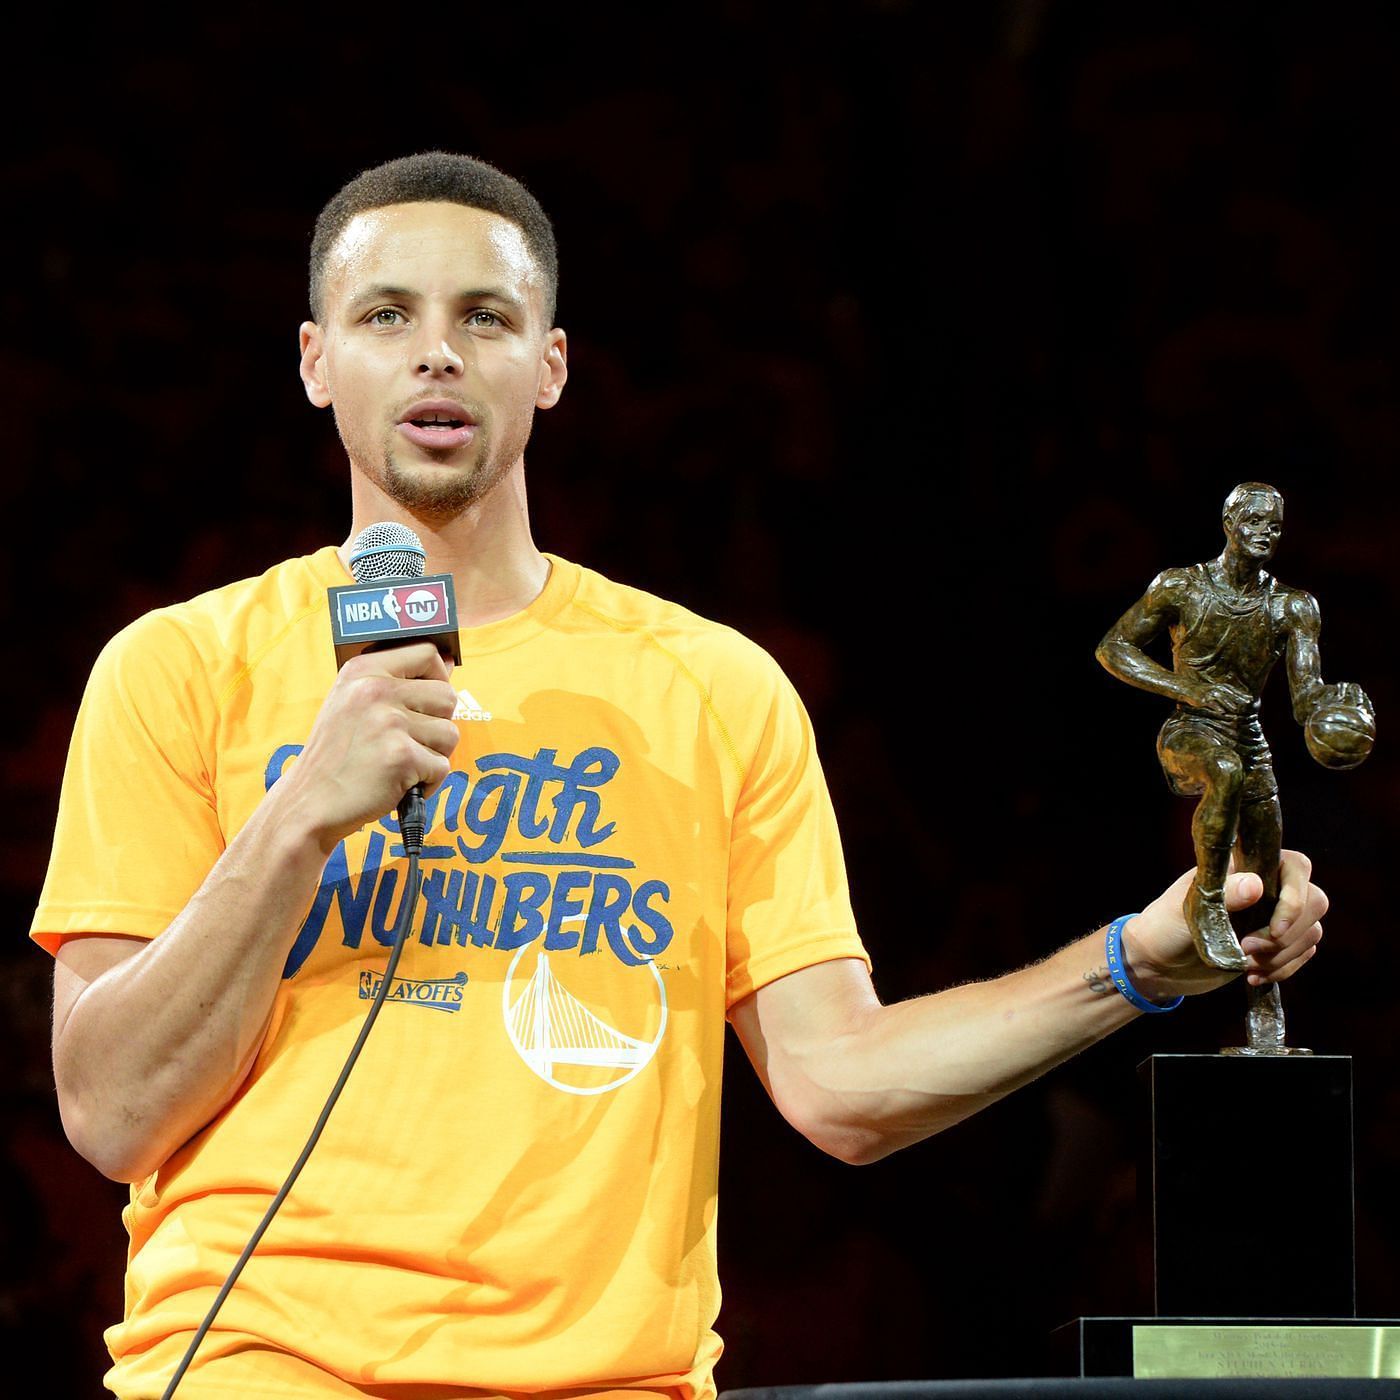 Steph Curry is a heavy favorite to win his first NBA Finals MVP if the Golden State Warriors win the title. [Photo: Golden State of Mind]